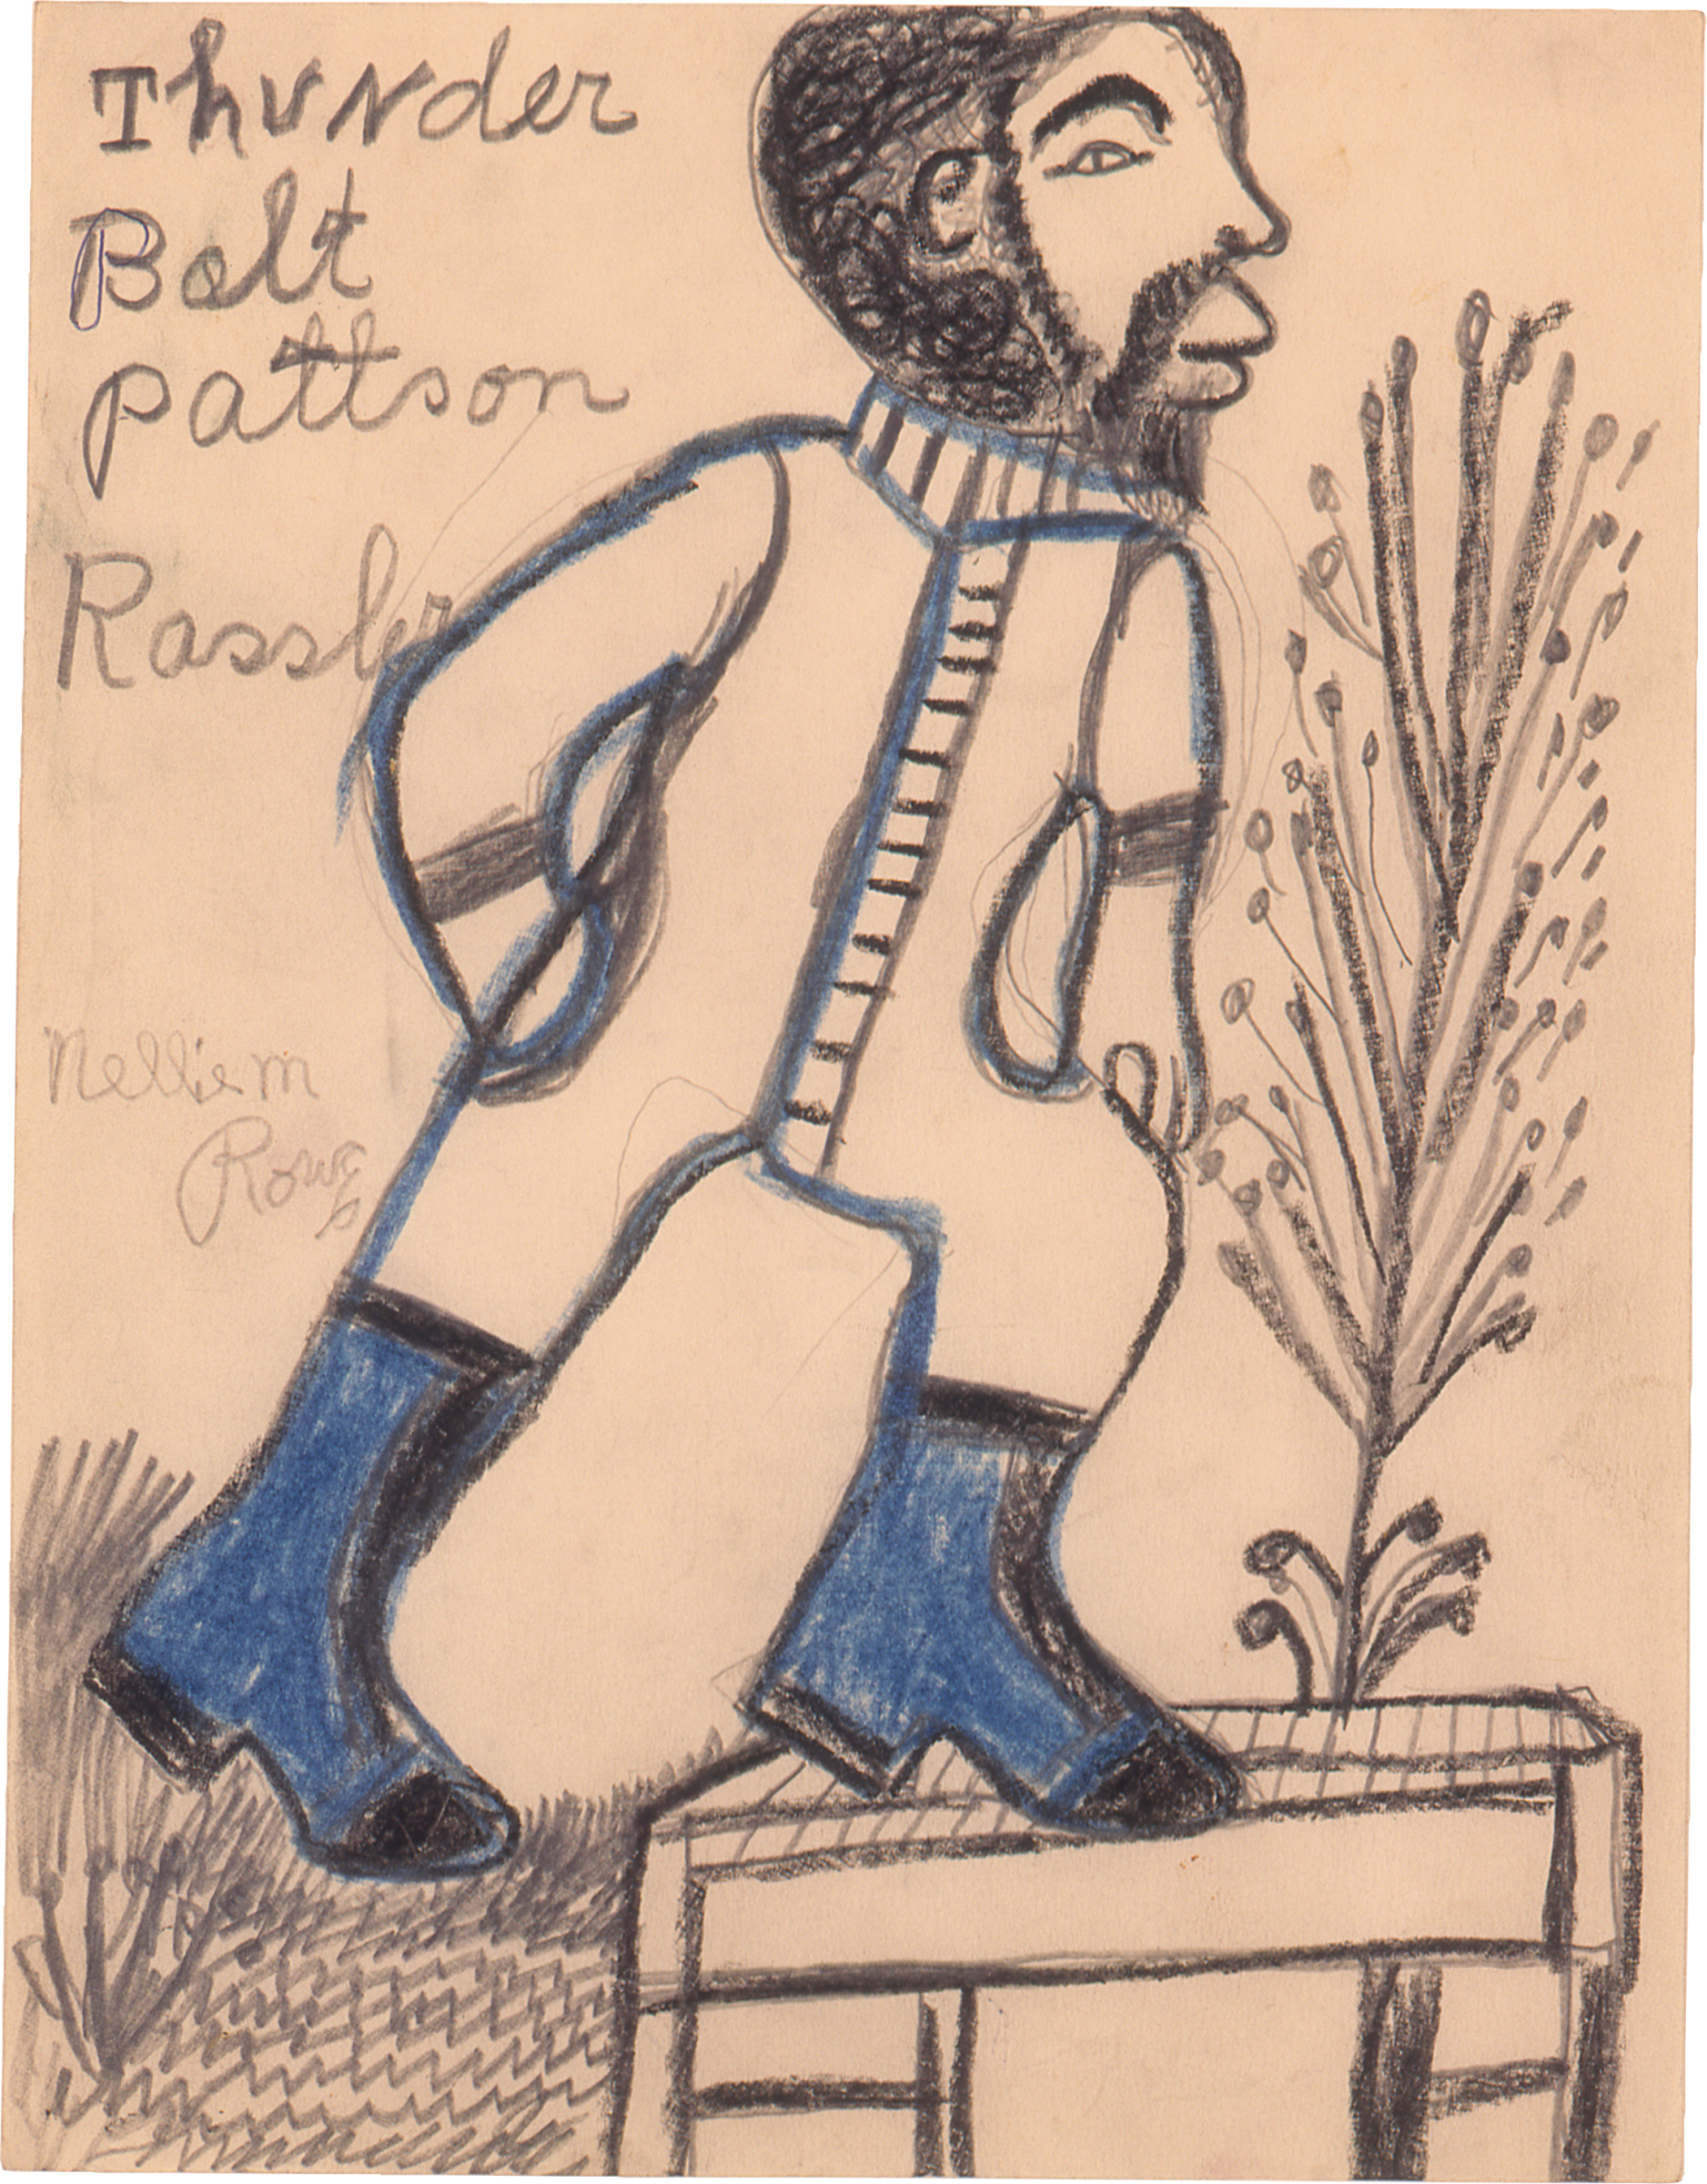 Full-body drawing of bearded figure with blue and black outlining and one hand in pocket, stepping onto a platform; “Thunder Bolt Pattson Rassler” written in top left corner.